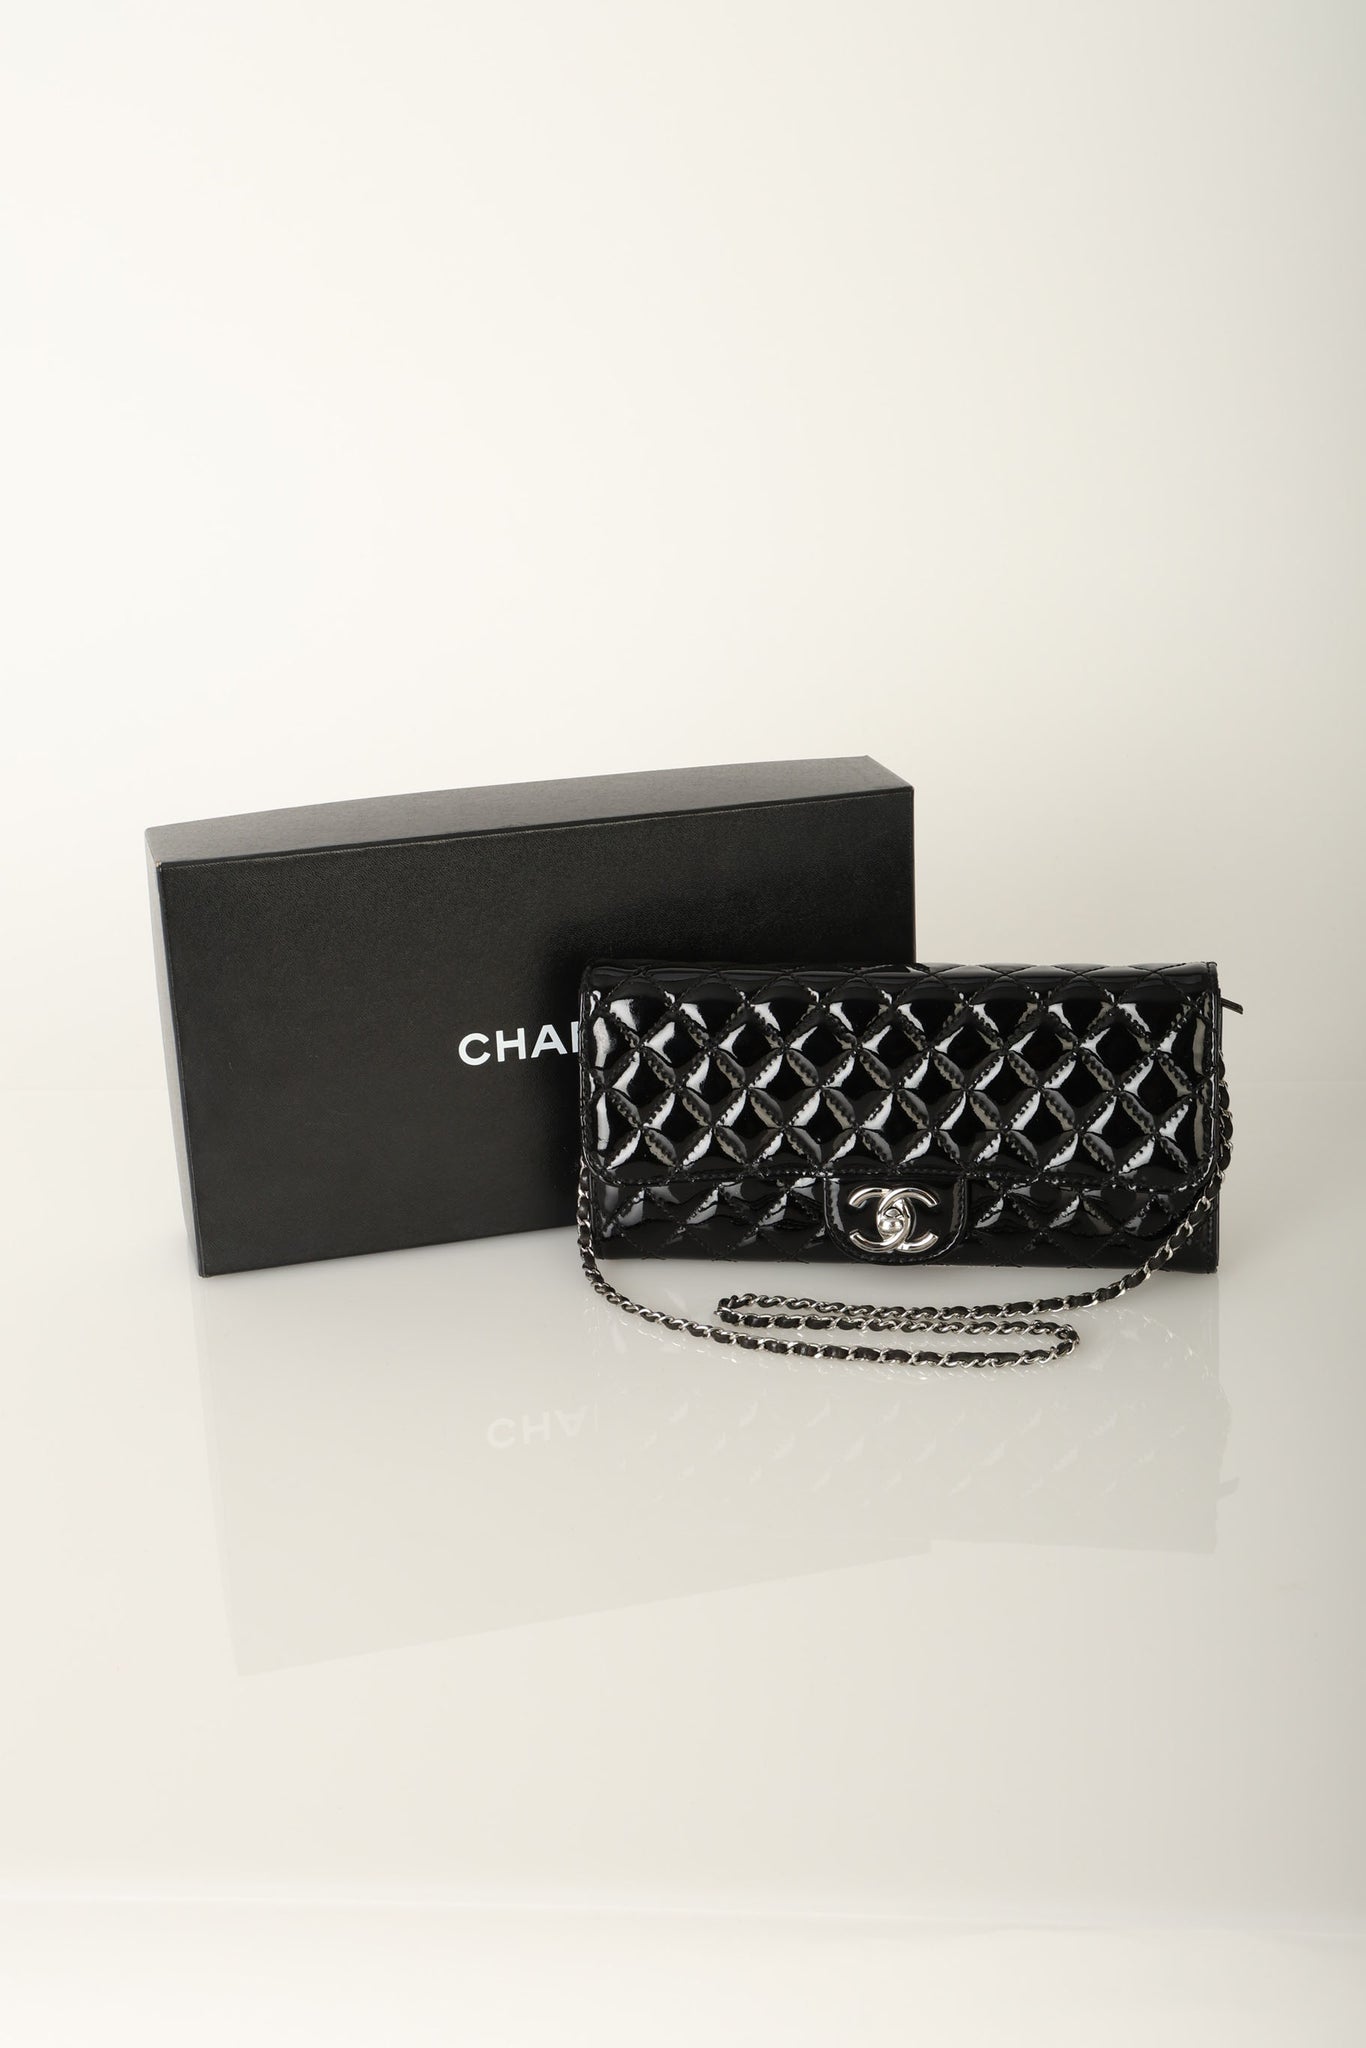 Chanel 2011 Patent Leather East West Wallet on Chain